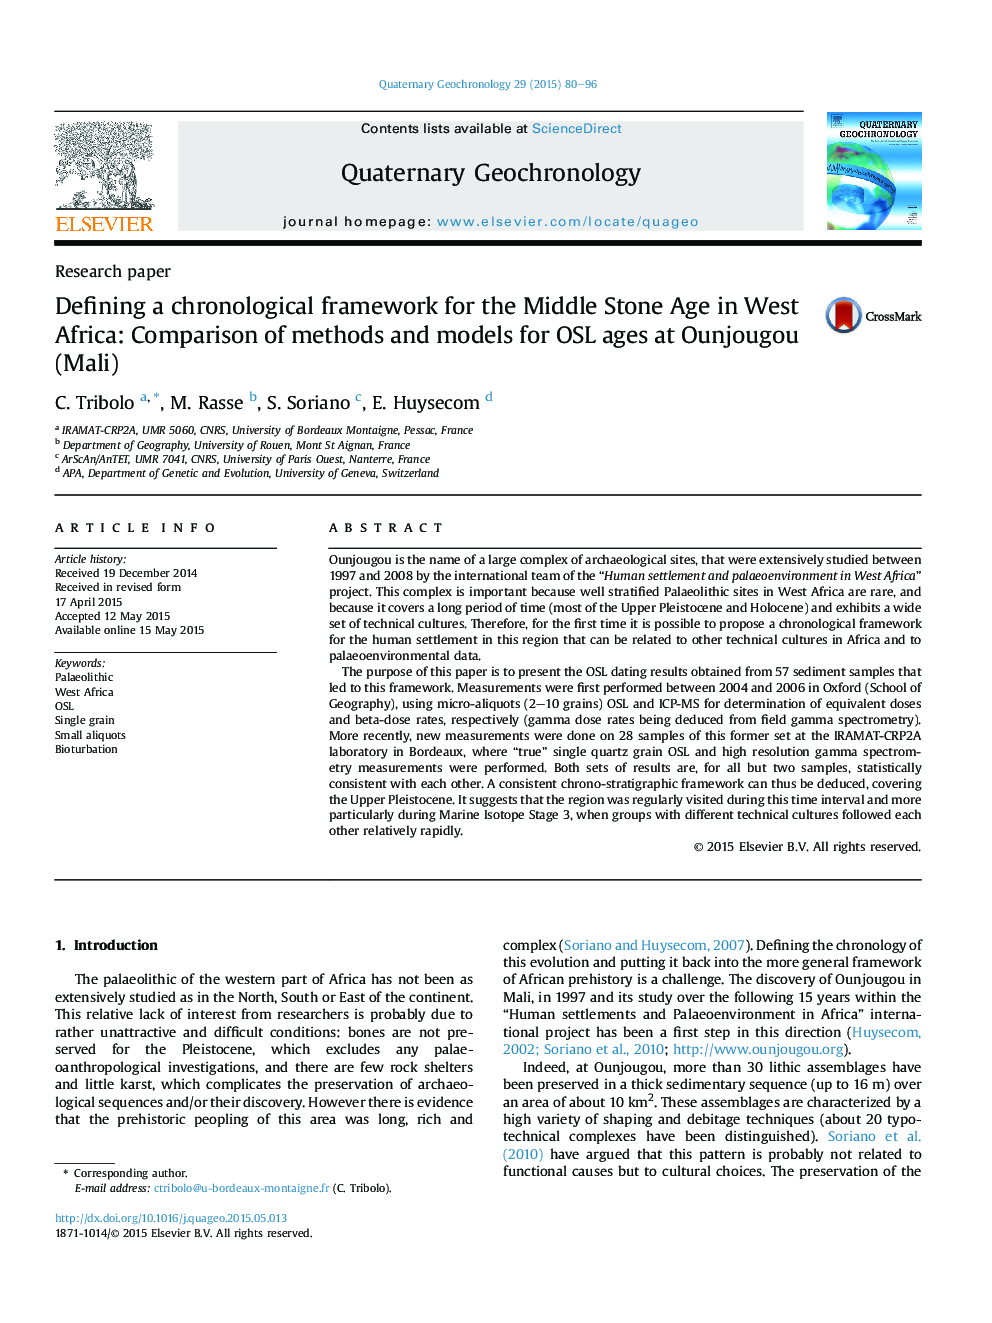 Defining a chronological framework for the Middle Stone Age in West Africa: Comparison of methods and models for OSL ages at Ounjougou (Mali)